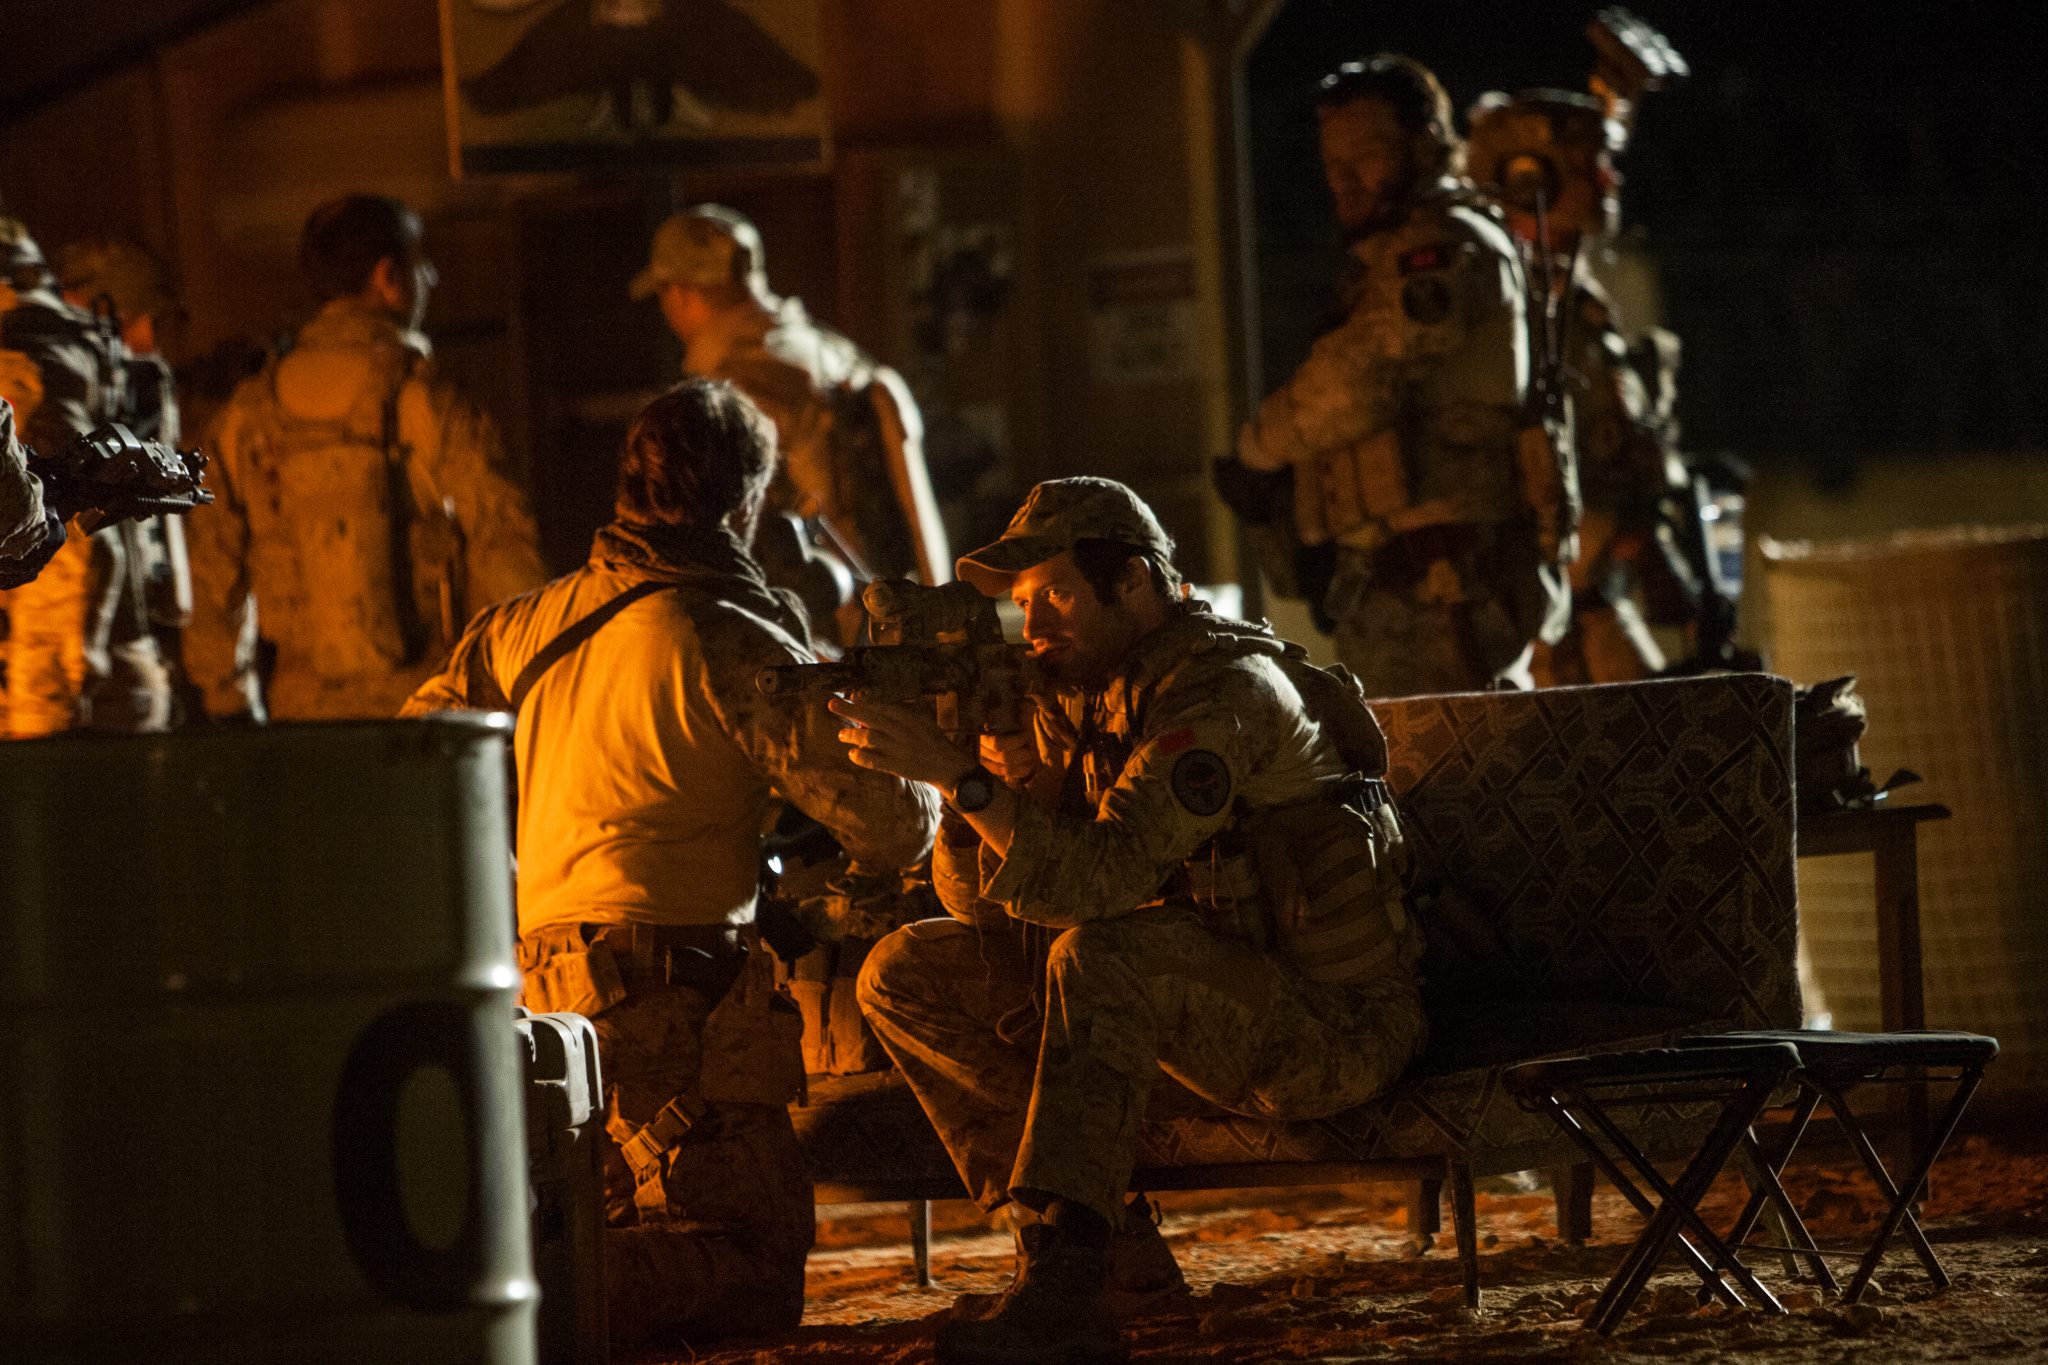 Watch: Go Behind-the-Scenes of 'Zero Dark Thirty' With Two ABC Specials Featuring New ...2048 x 1365